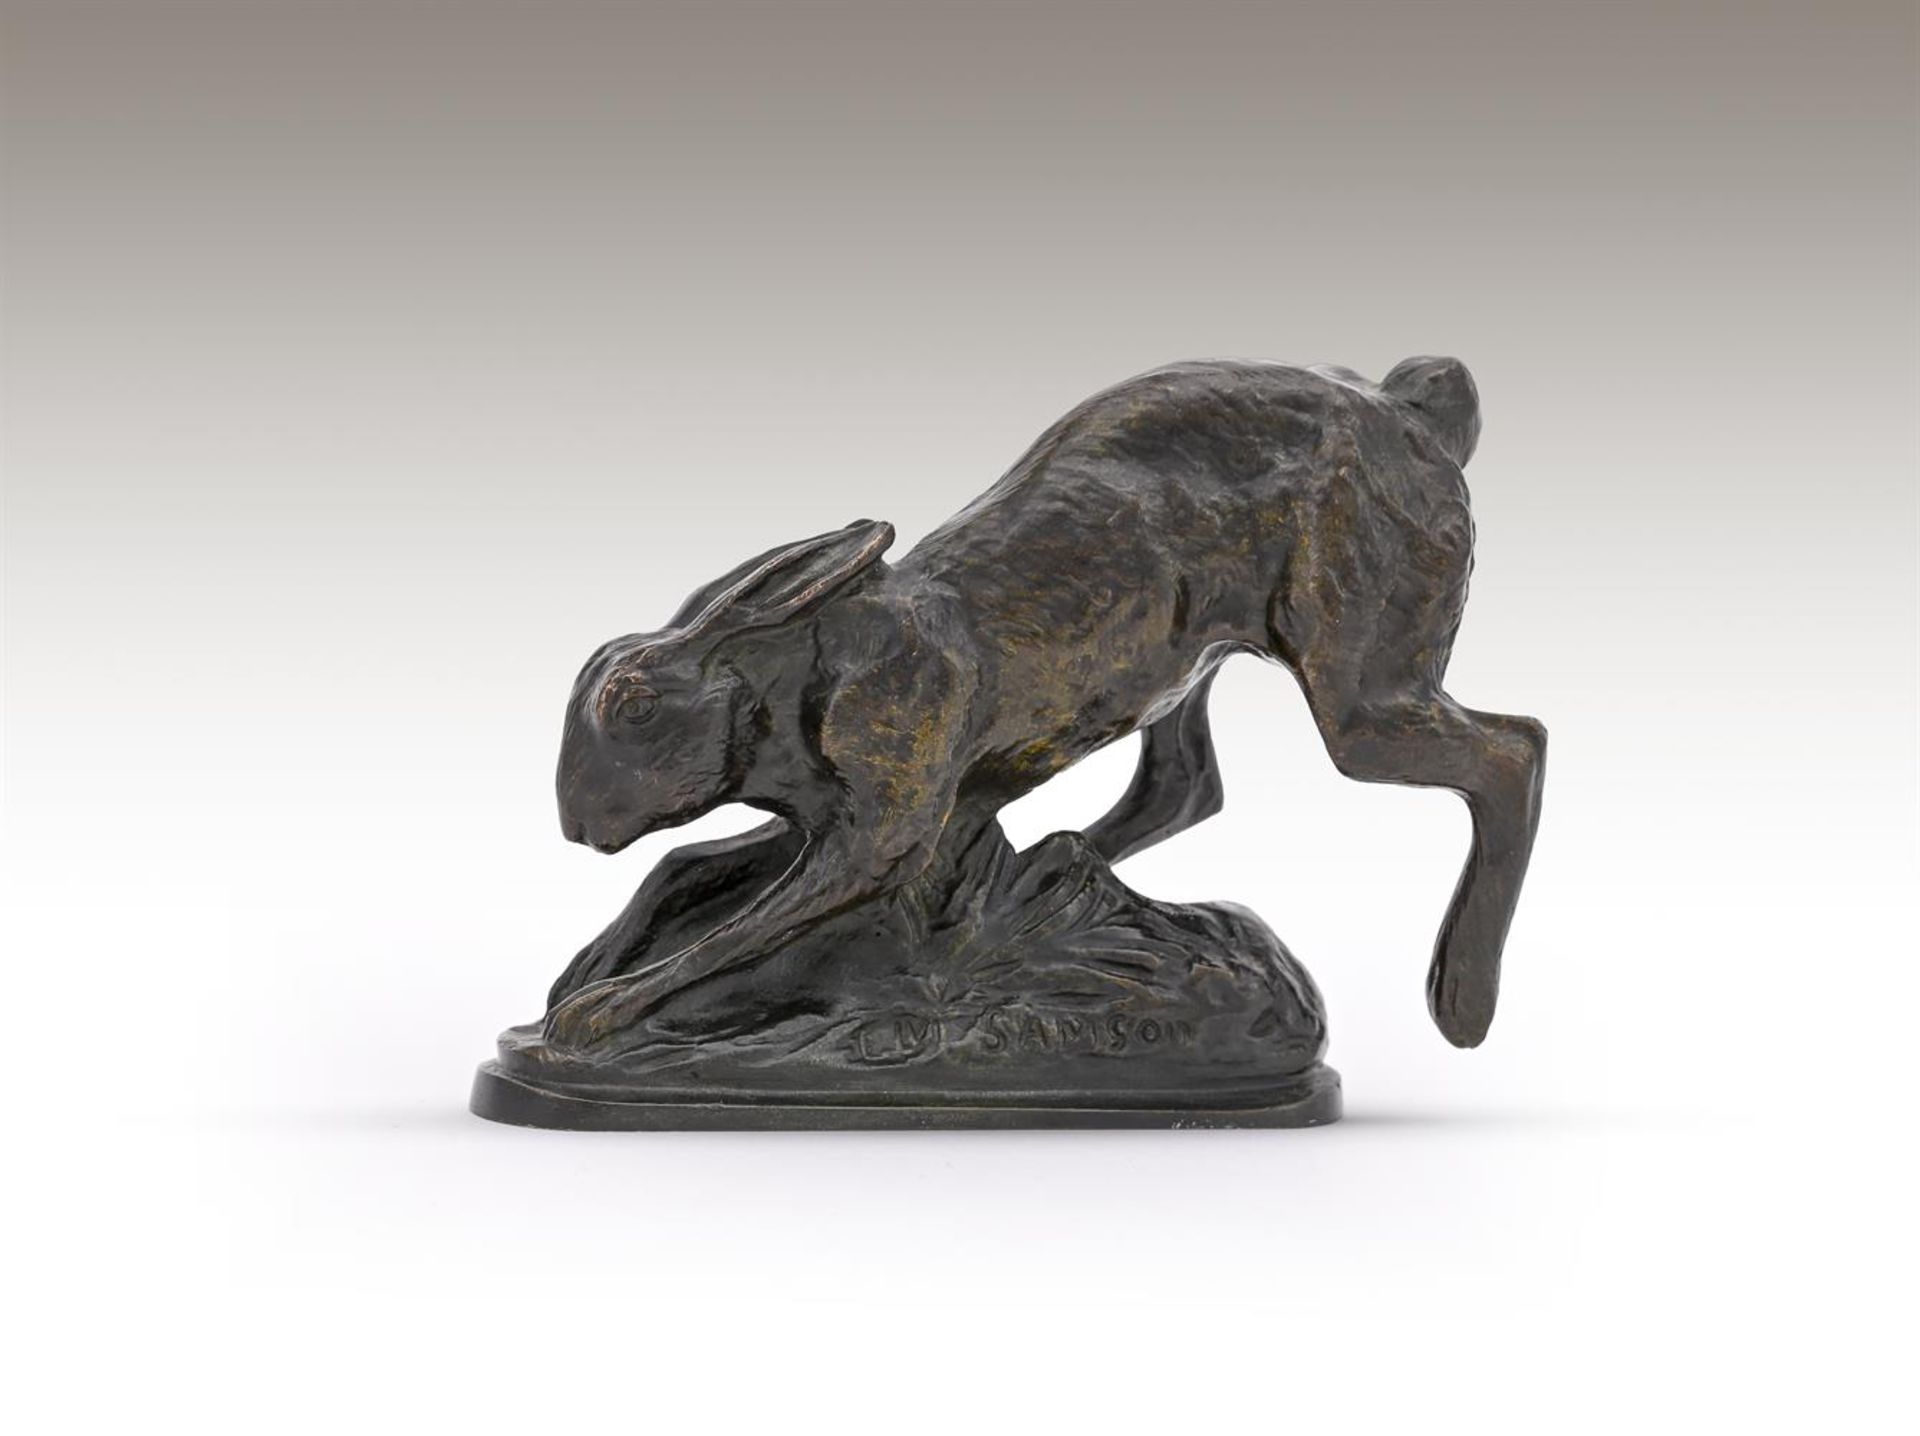 E M SAMSON (FRENCH, LATE 19TH/EARLY 20TH CENTURY), A BRONZE MODEL OF A RUNNING HARE - Image 5 of 5